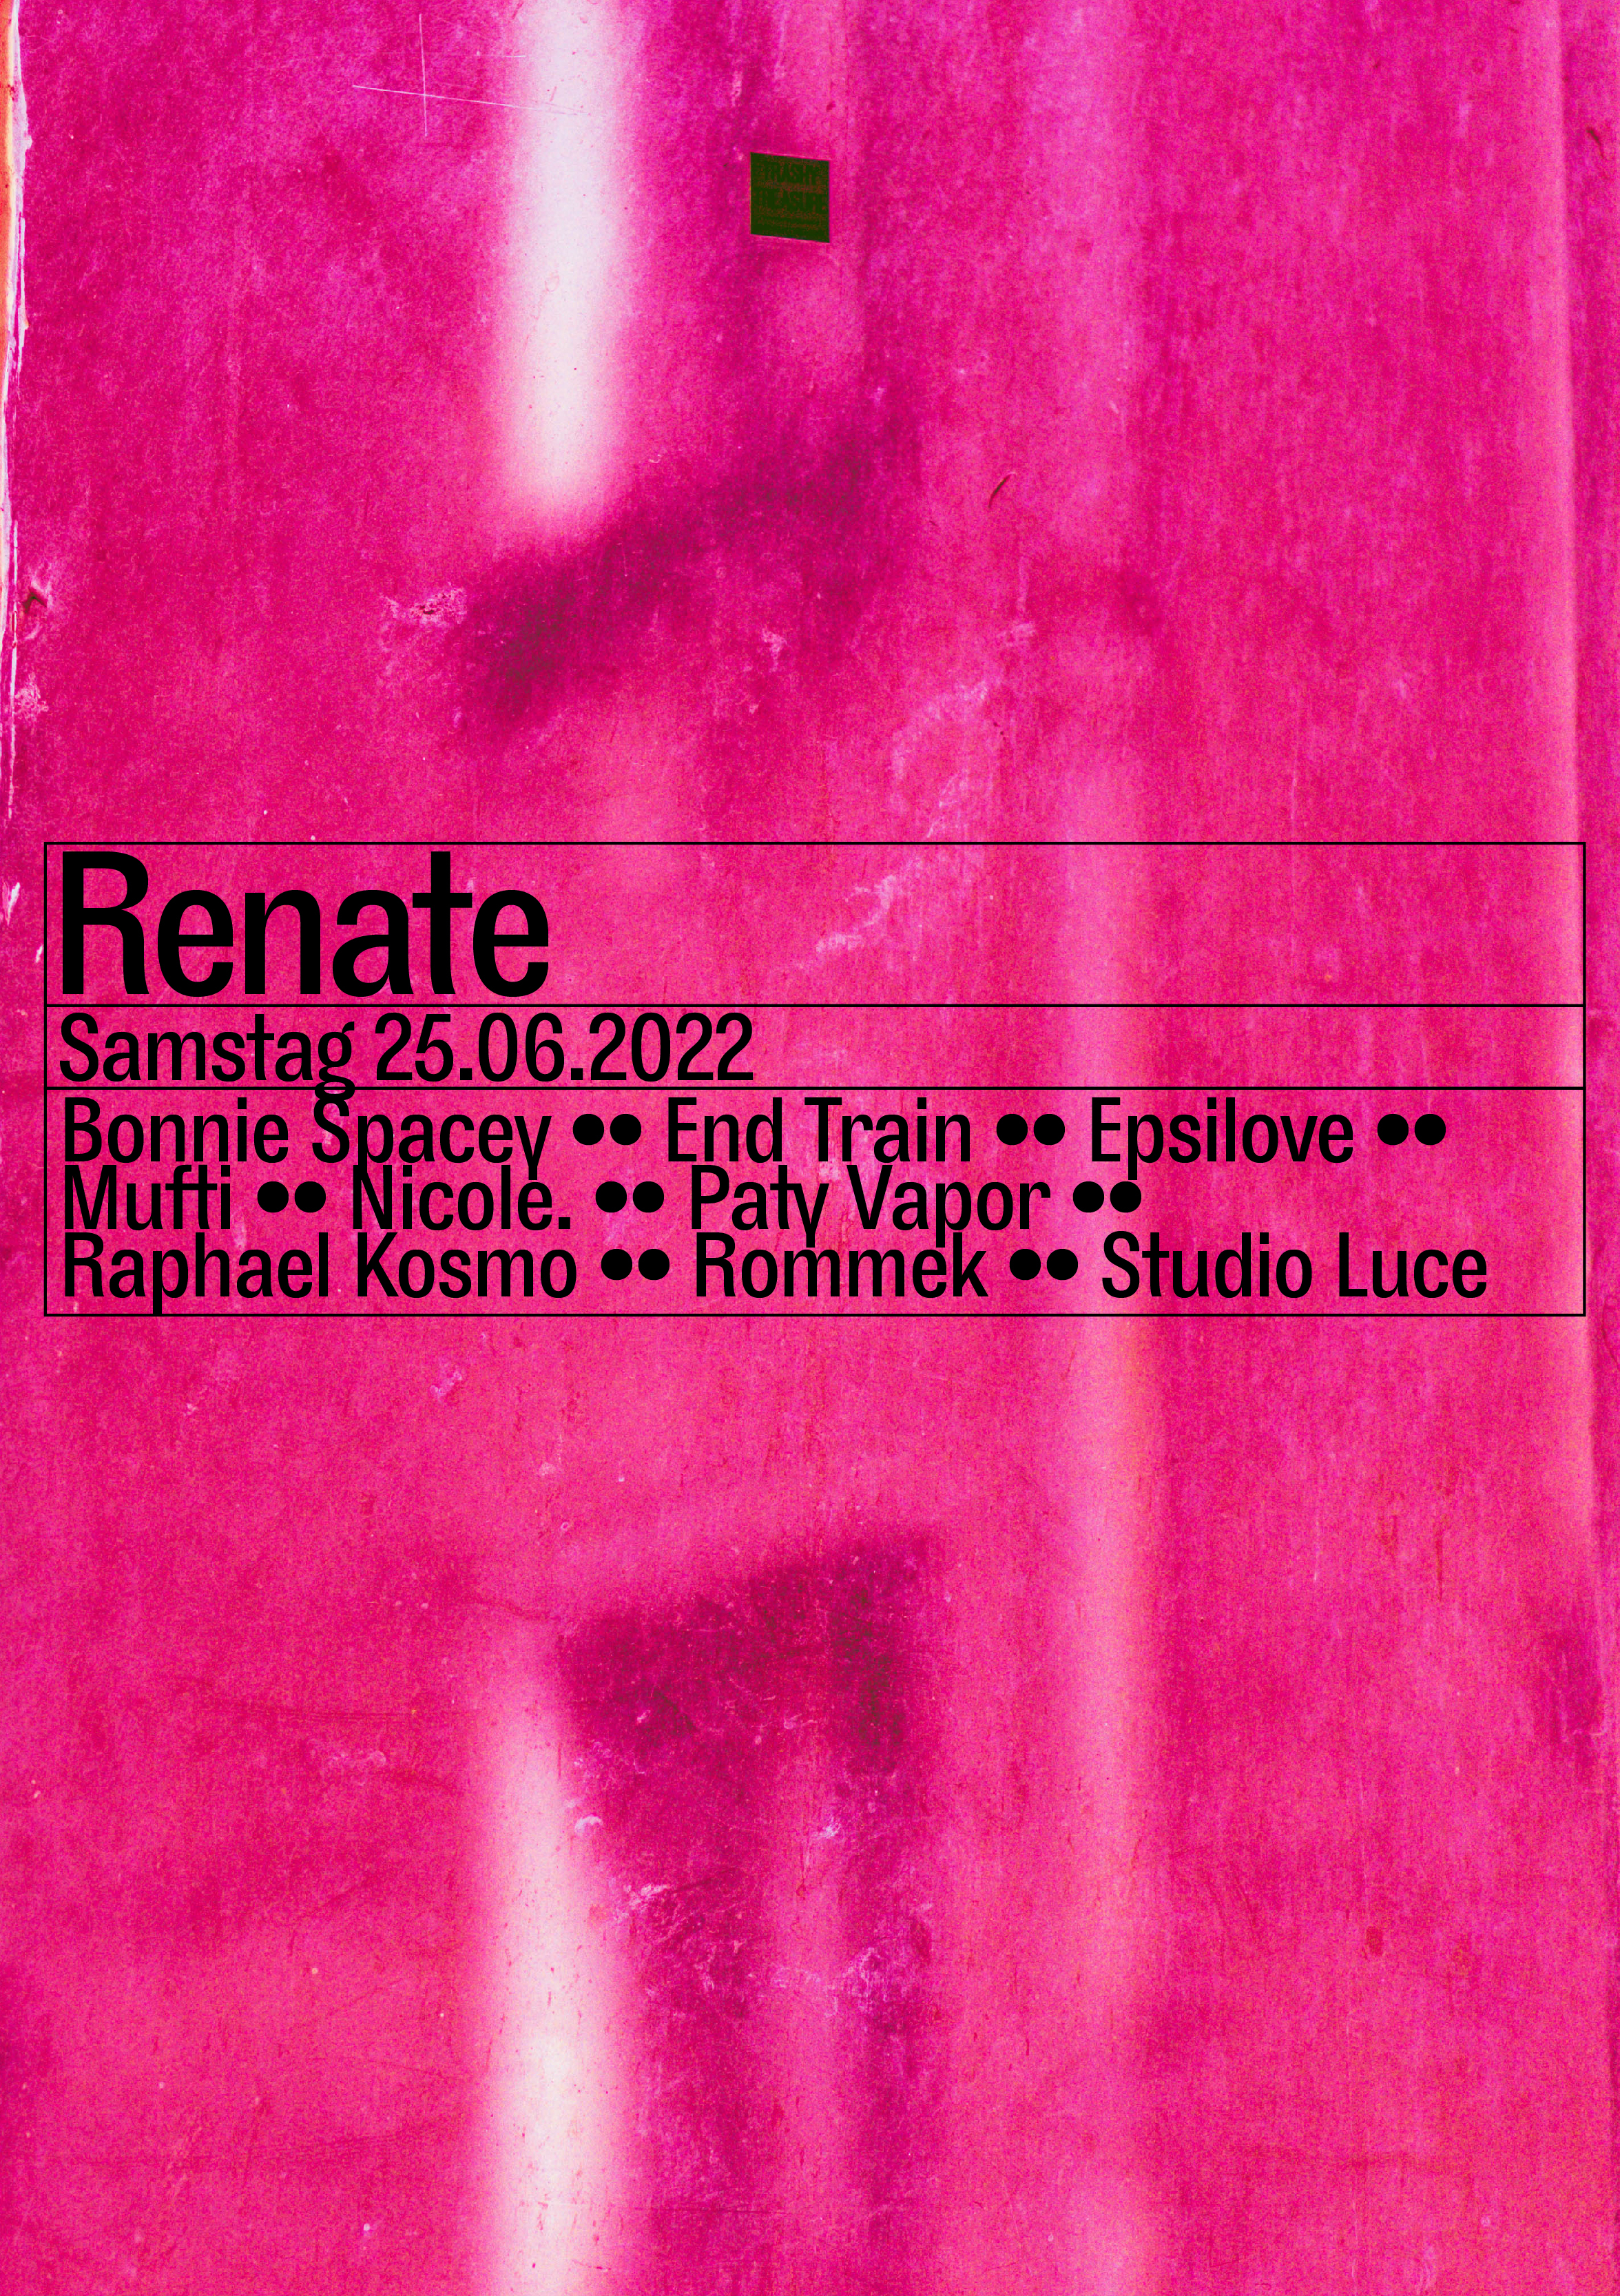 Samstag with Bonnie Spacey, Studio Luce, Nicole., Rommek - Flyer front